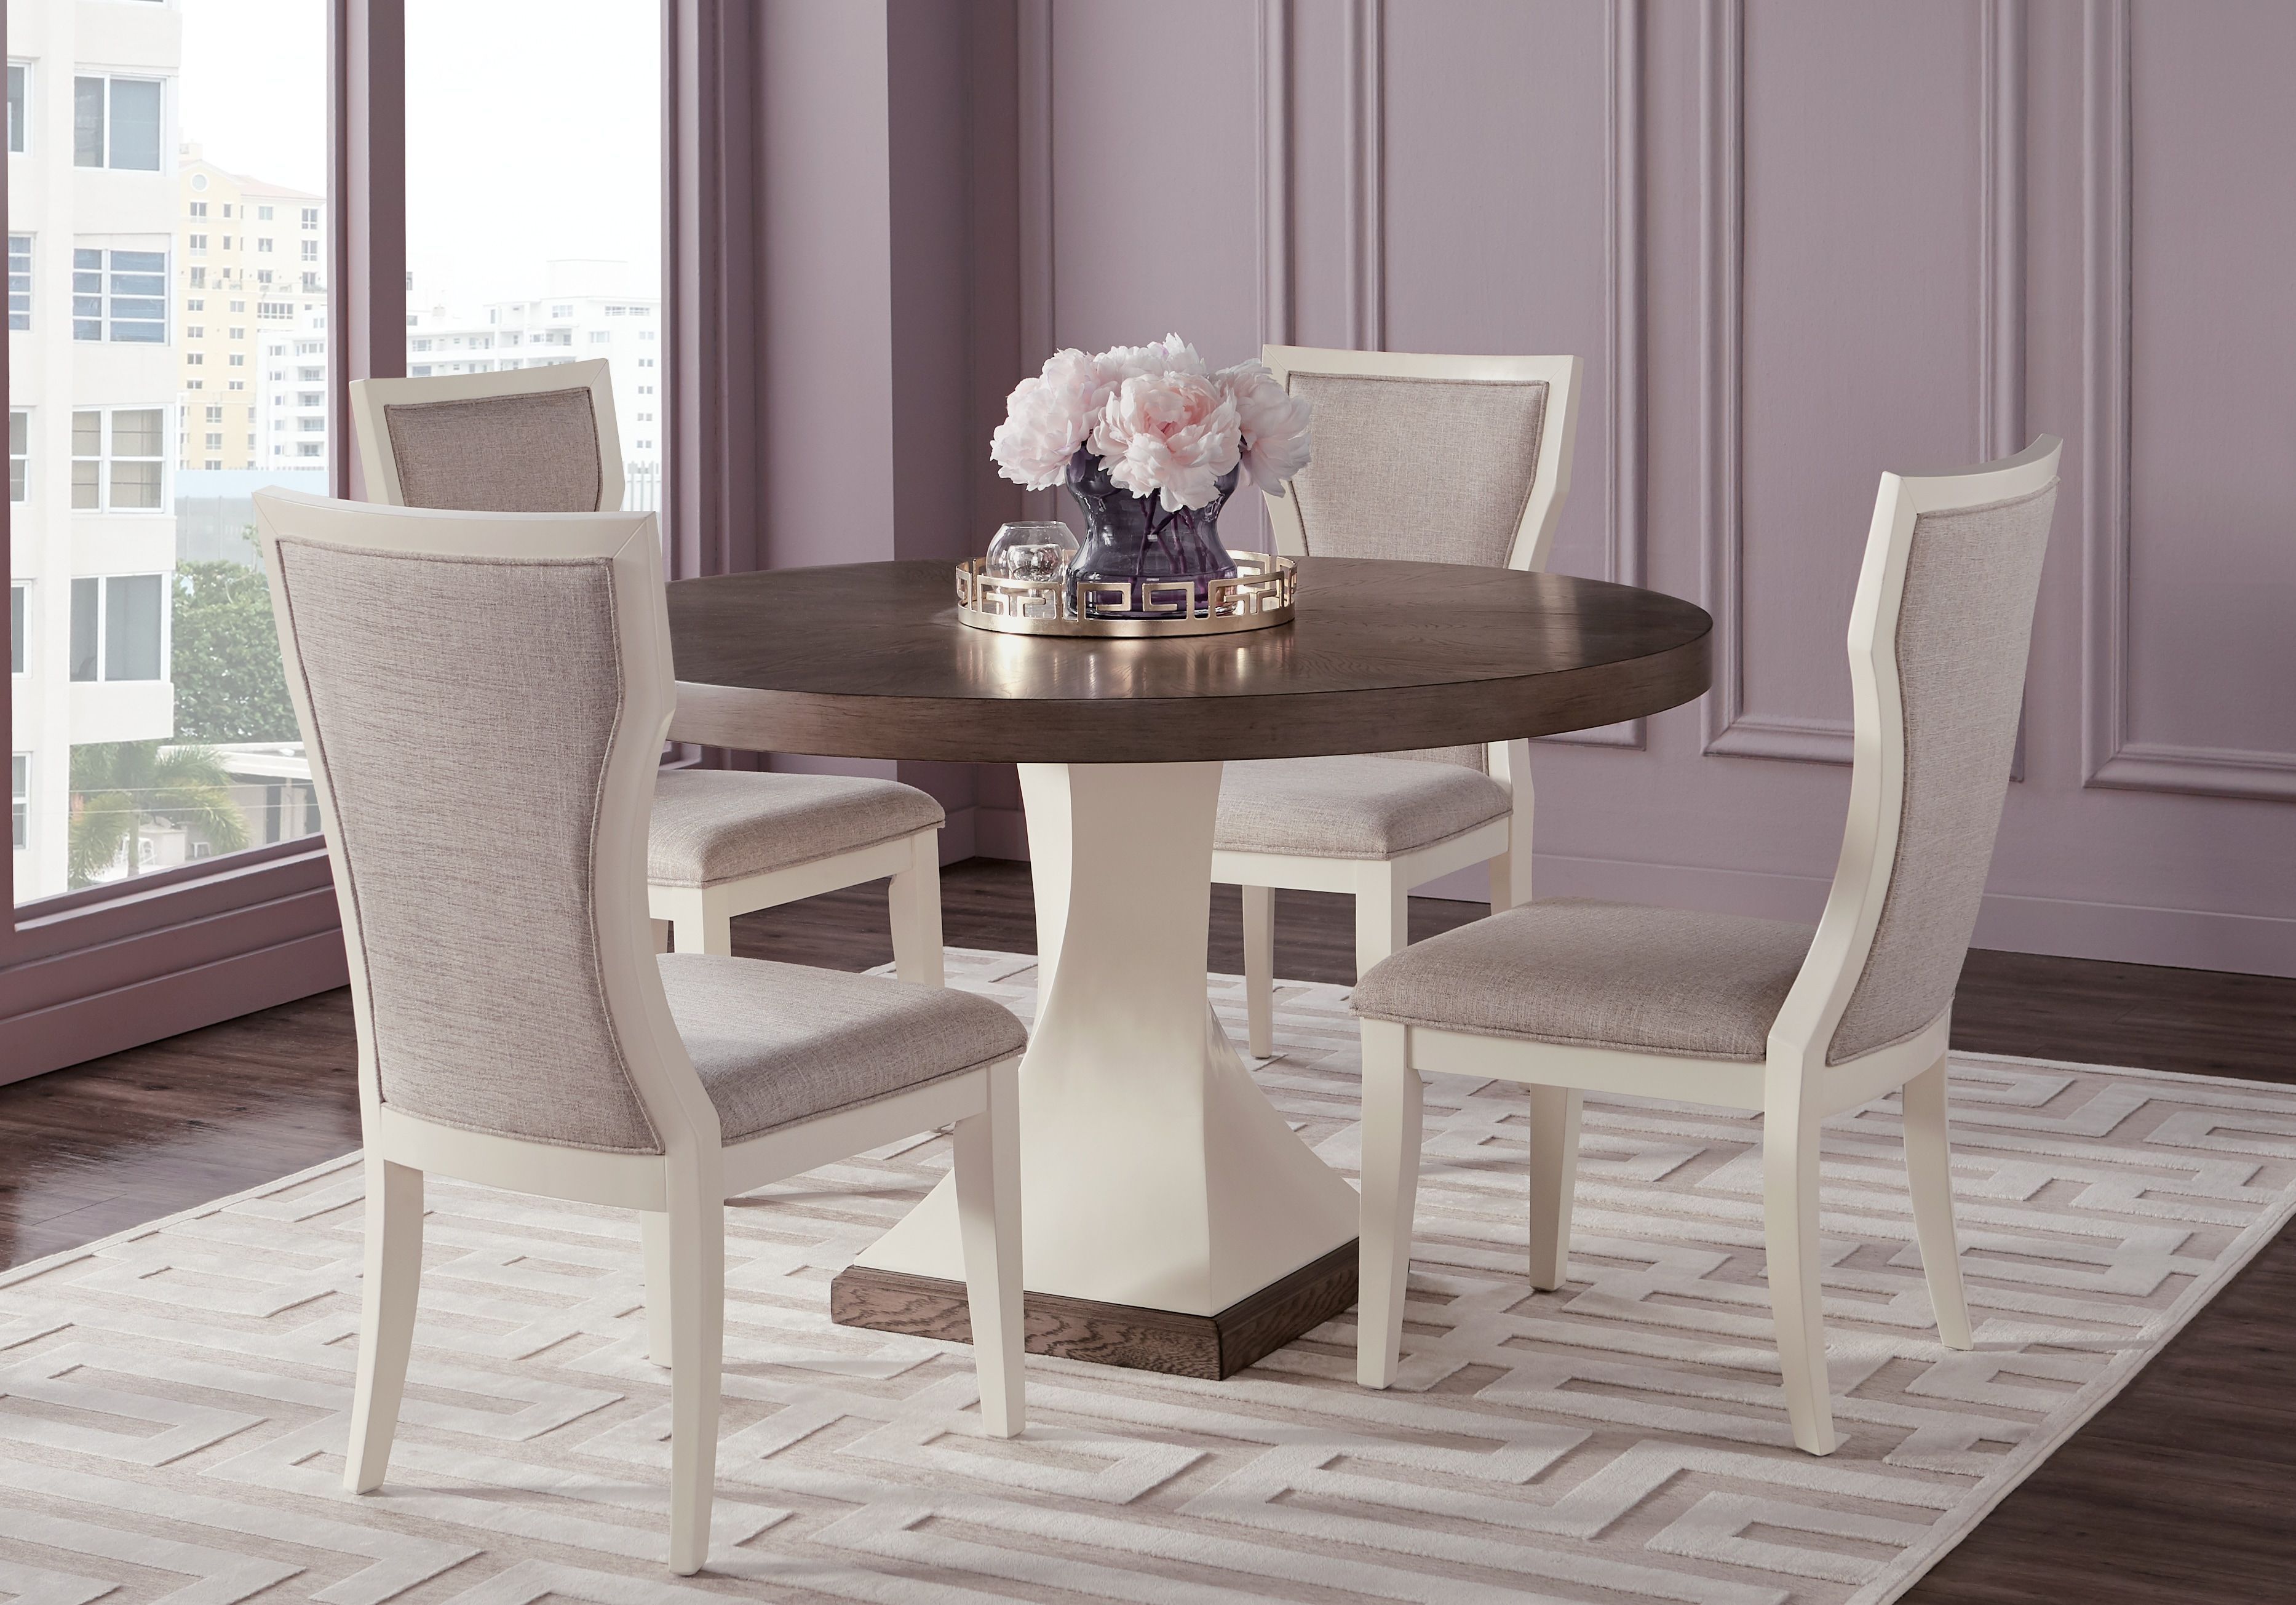 Sofia Vergara Santa Fiora White 5 Pc Round Dining Room In 2019 For Current Lamotte 5 Piece Dining Sets (View 7 of 20)